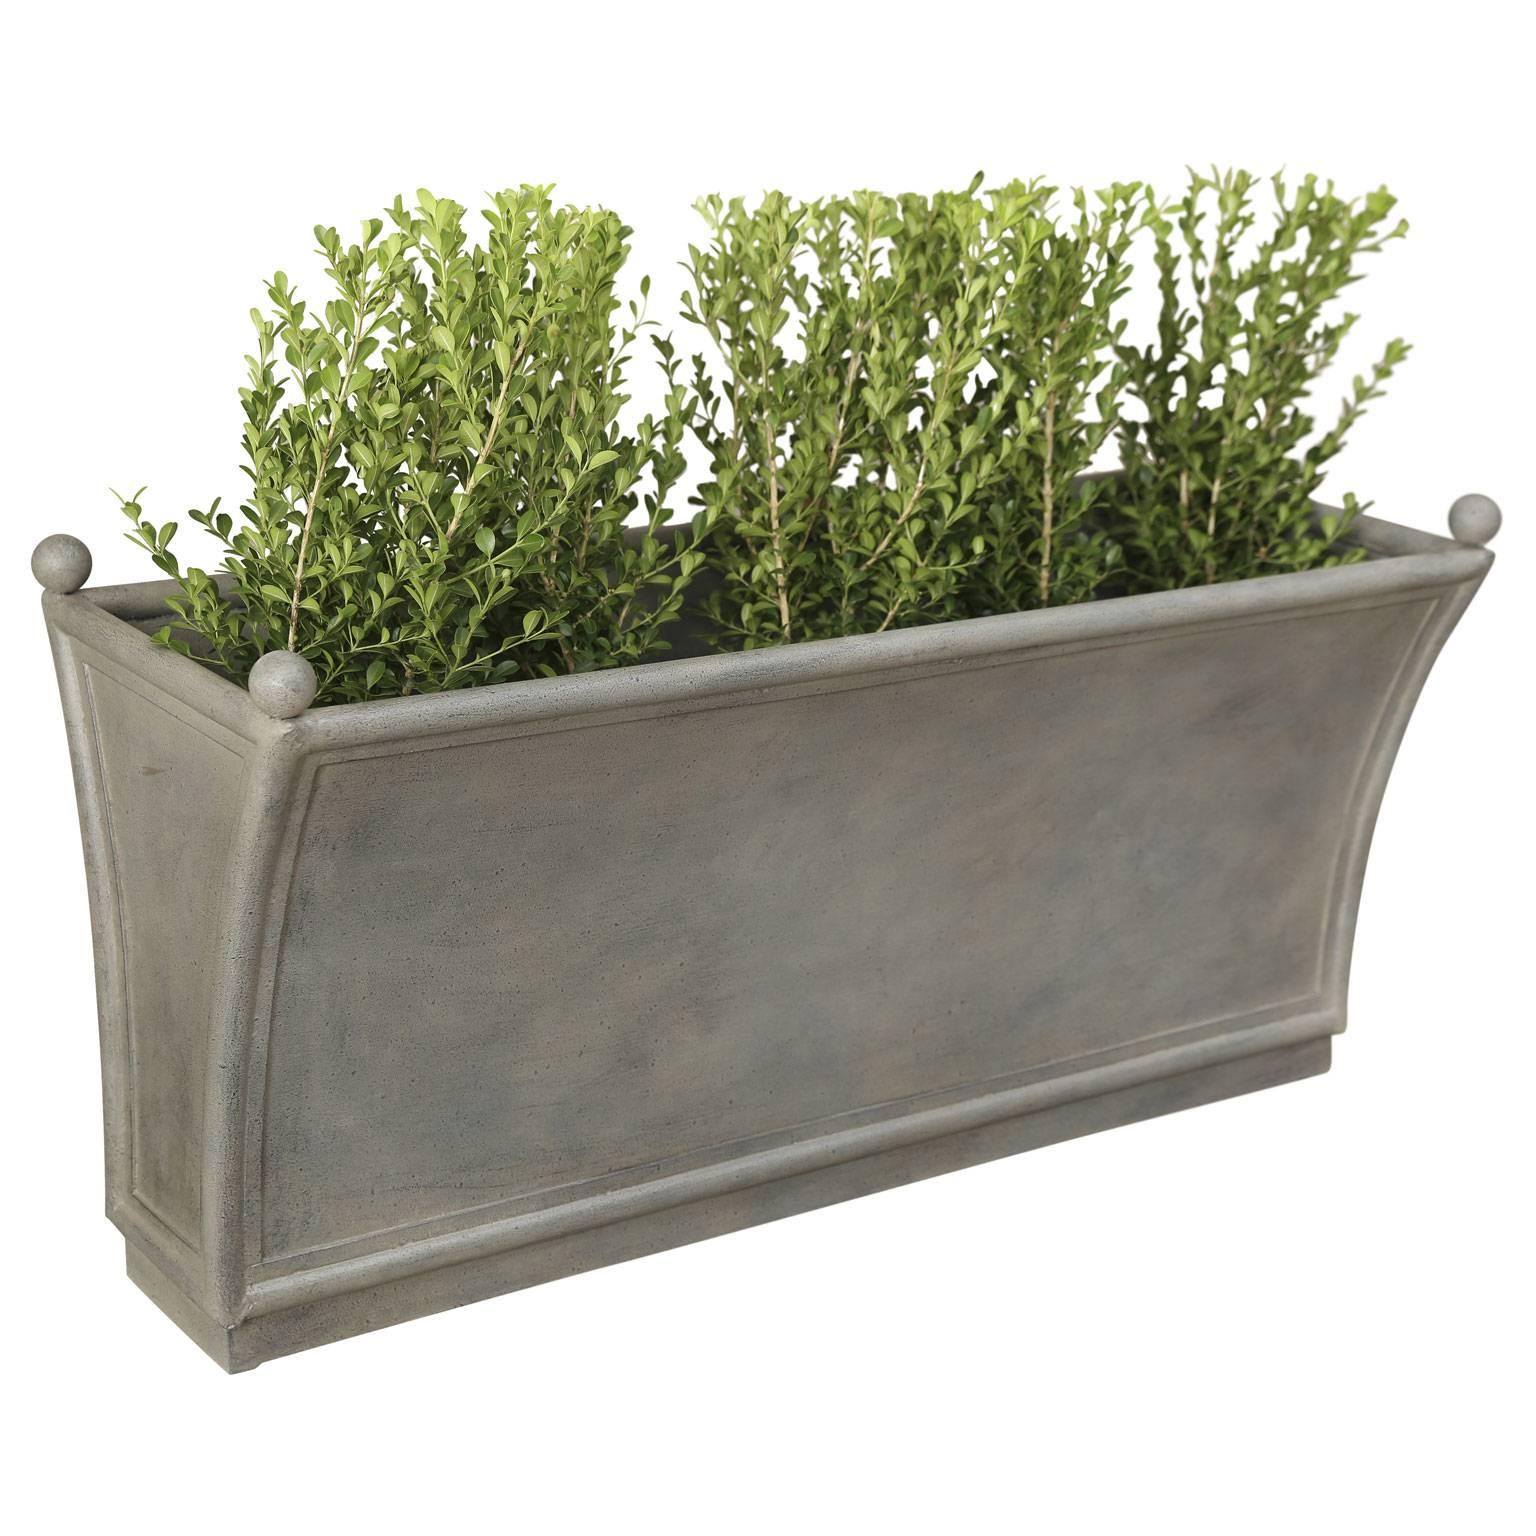 Two French style long metal planters. Priced individually.